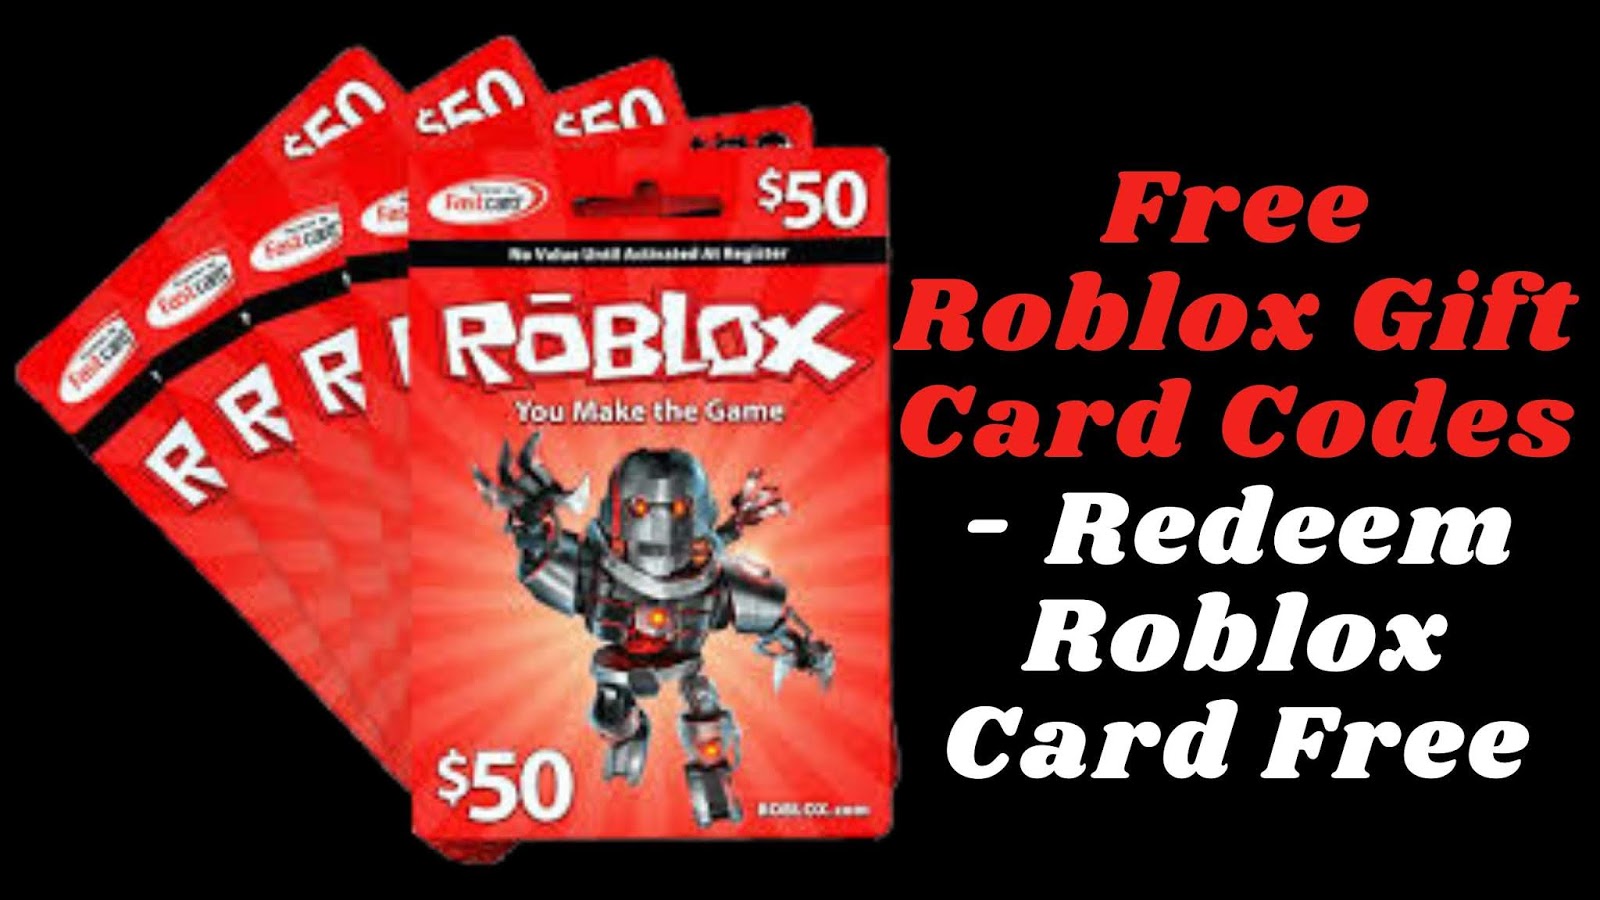 Free Gift Cards Free Roblox Gift Card Codes Redeem Roblox Card Free - how to redeem roblox gift cards 2020